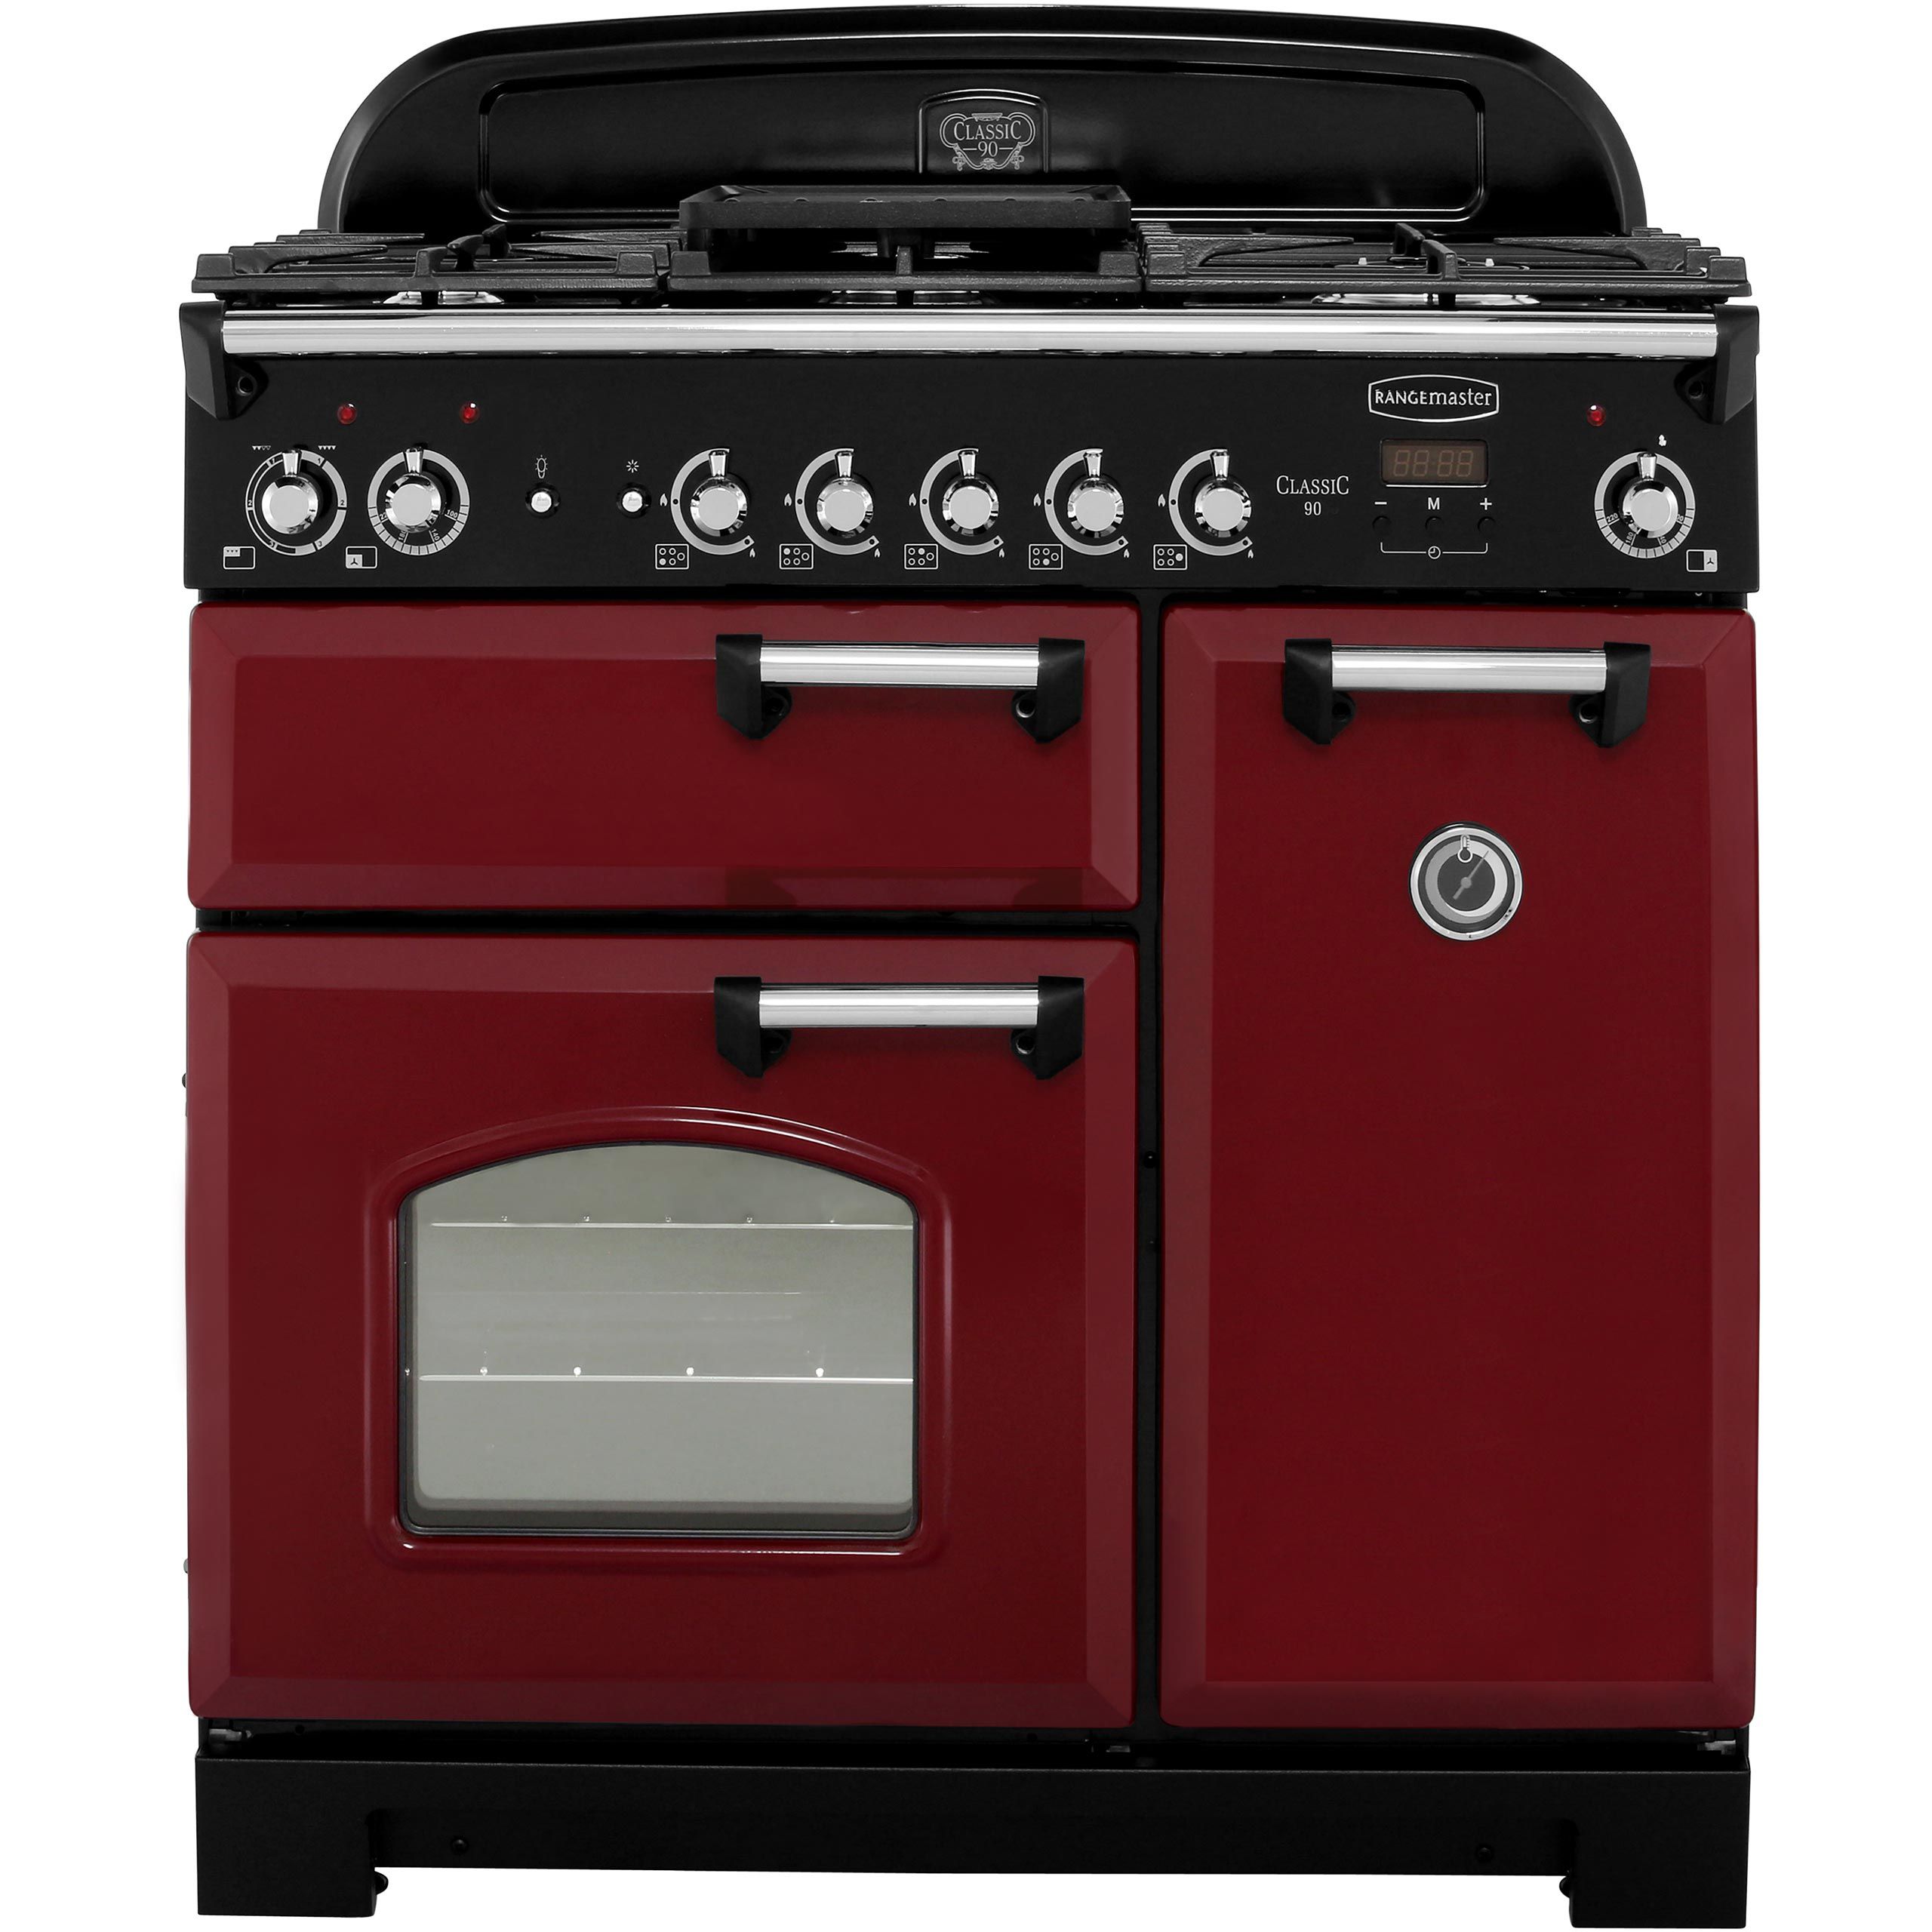 Rangemaster Classic CLA90DFFCY/C 90cm Dual Fuel Range Cooker - Cranberry / Chrome - A/A Rated, Red